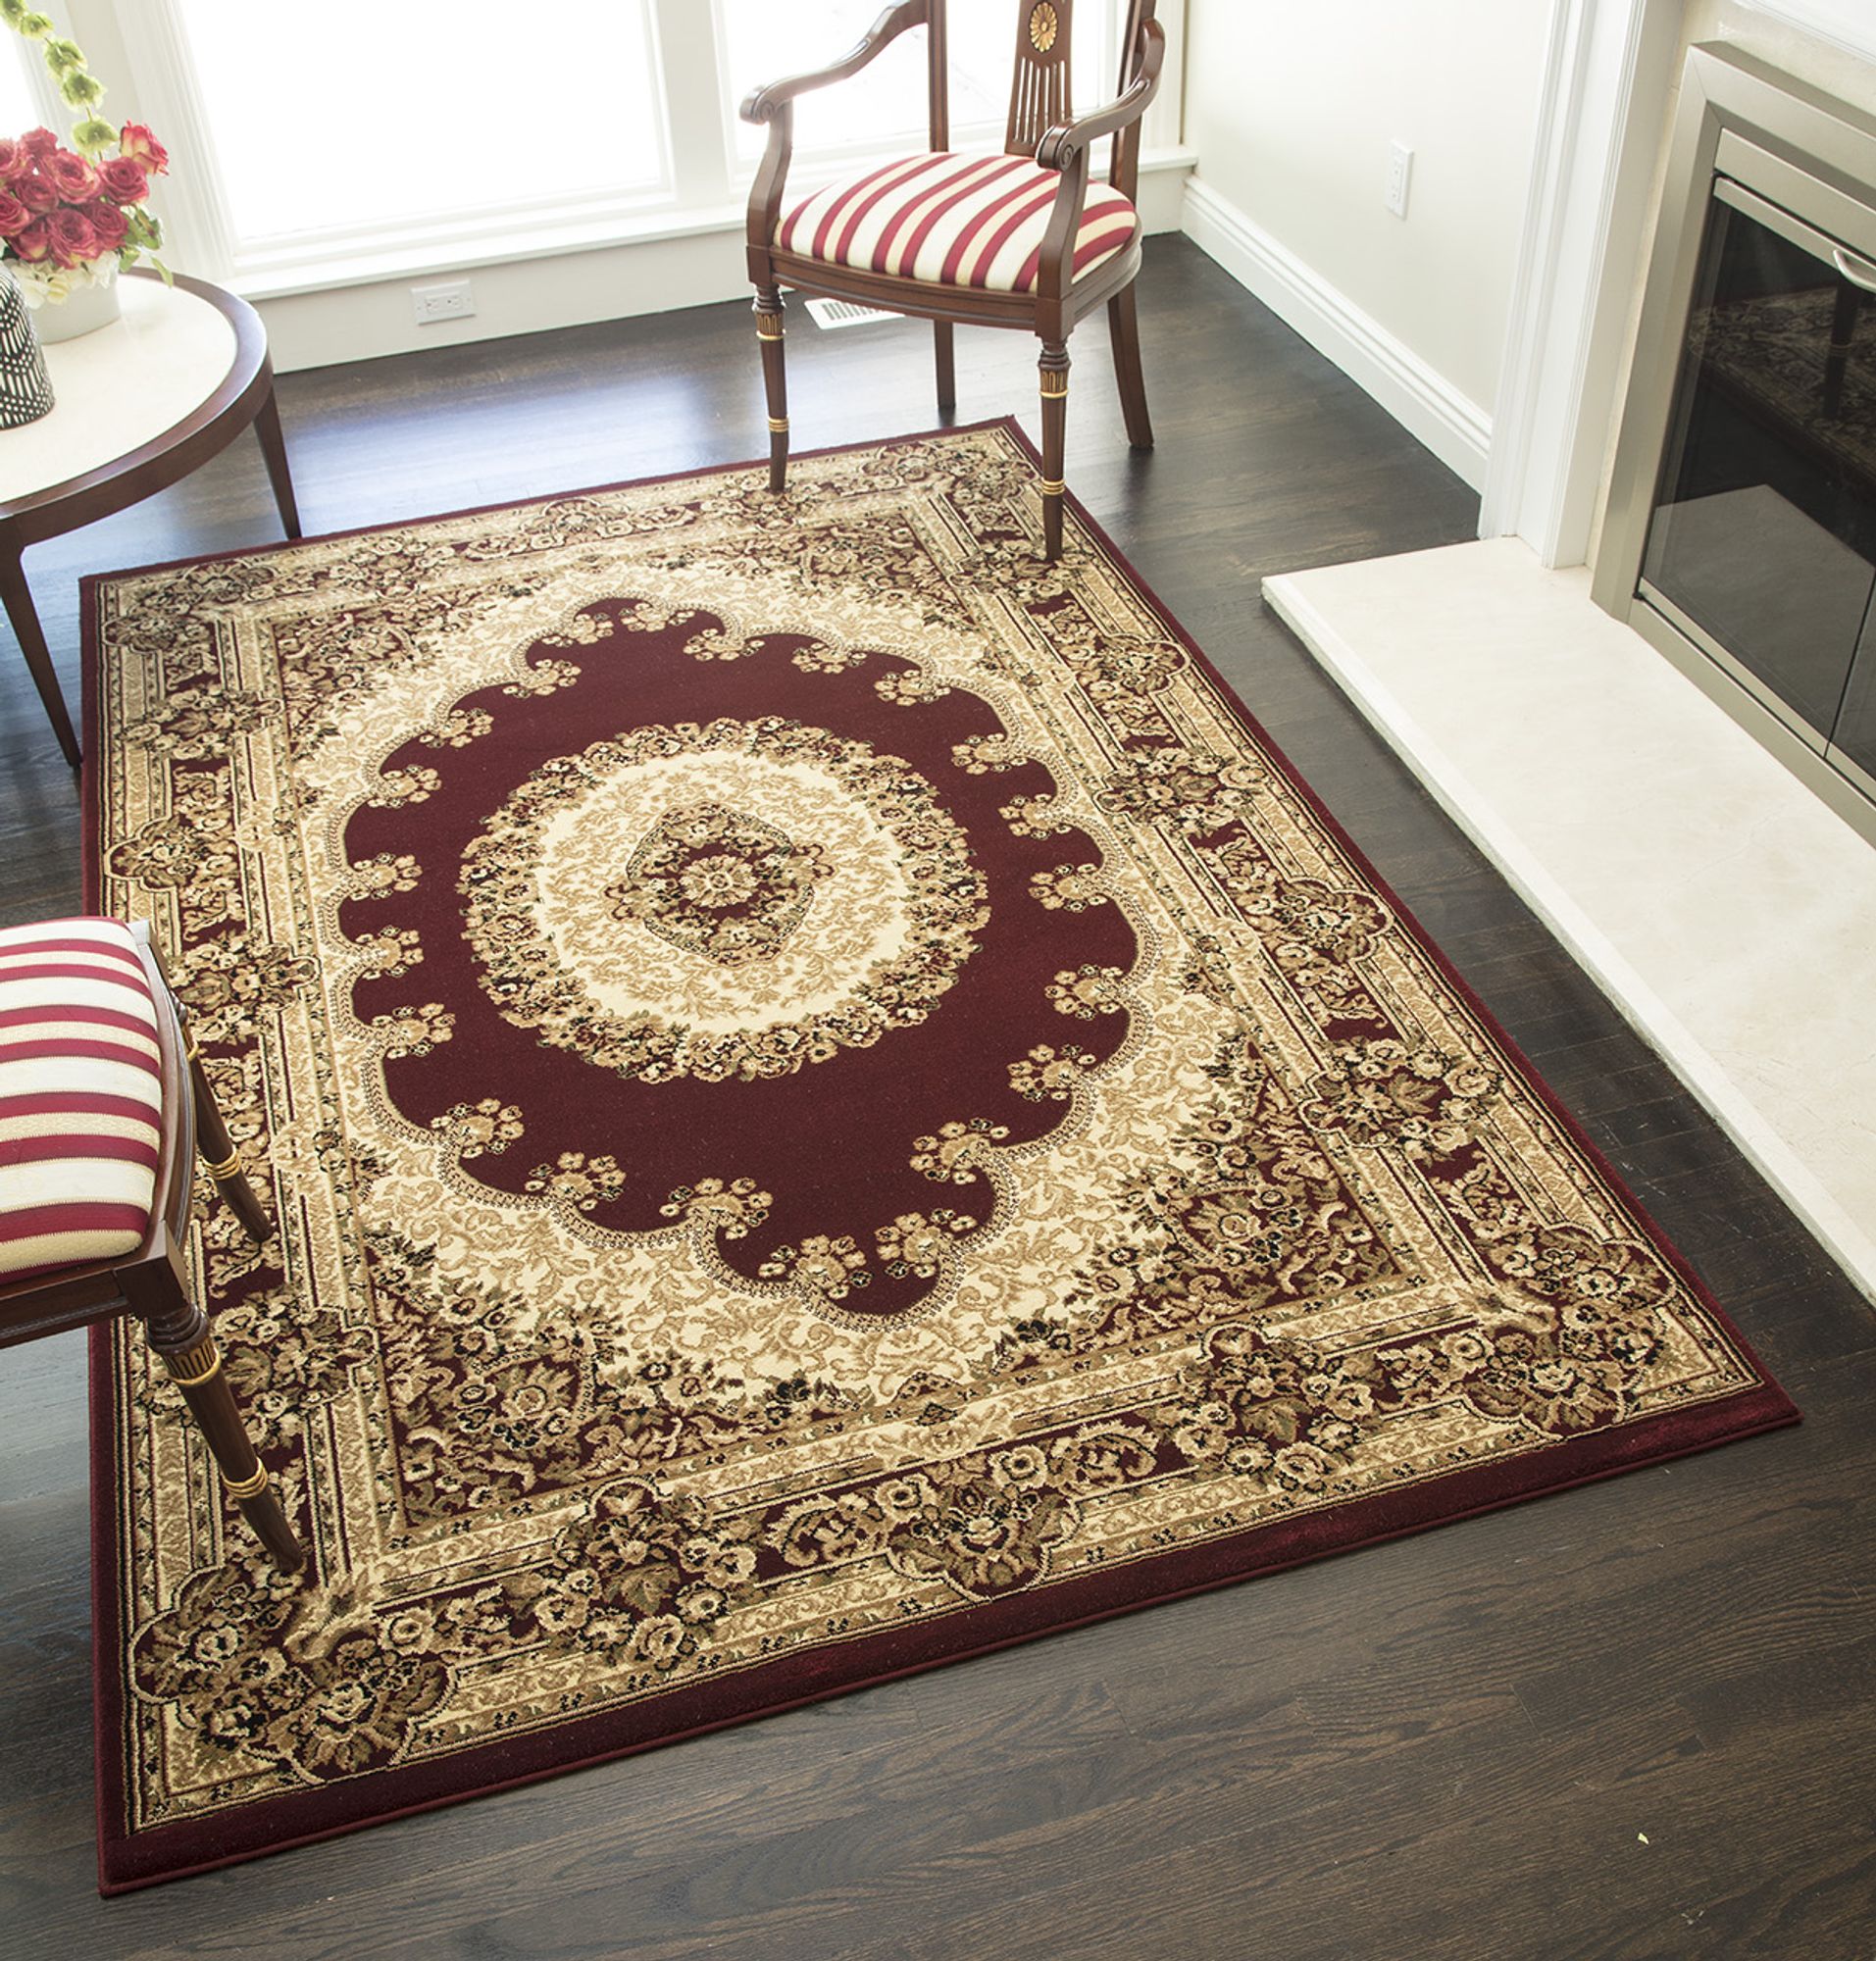 Rugs America Vista 807-RED Kerman Red Oriental Traditional Red Area Rug, 3'11"x5'3" - image 1 of 5